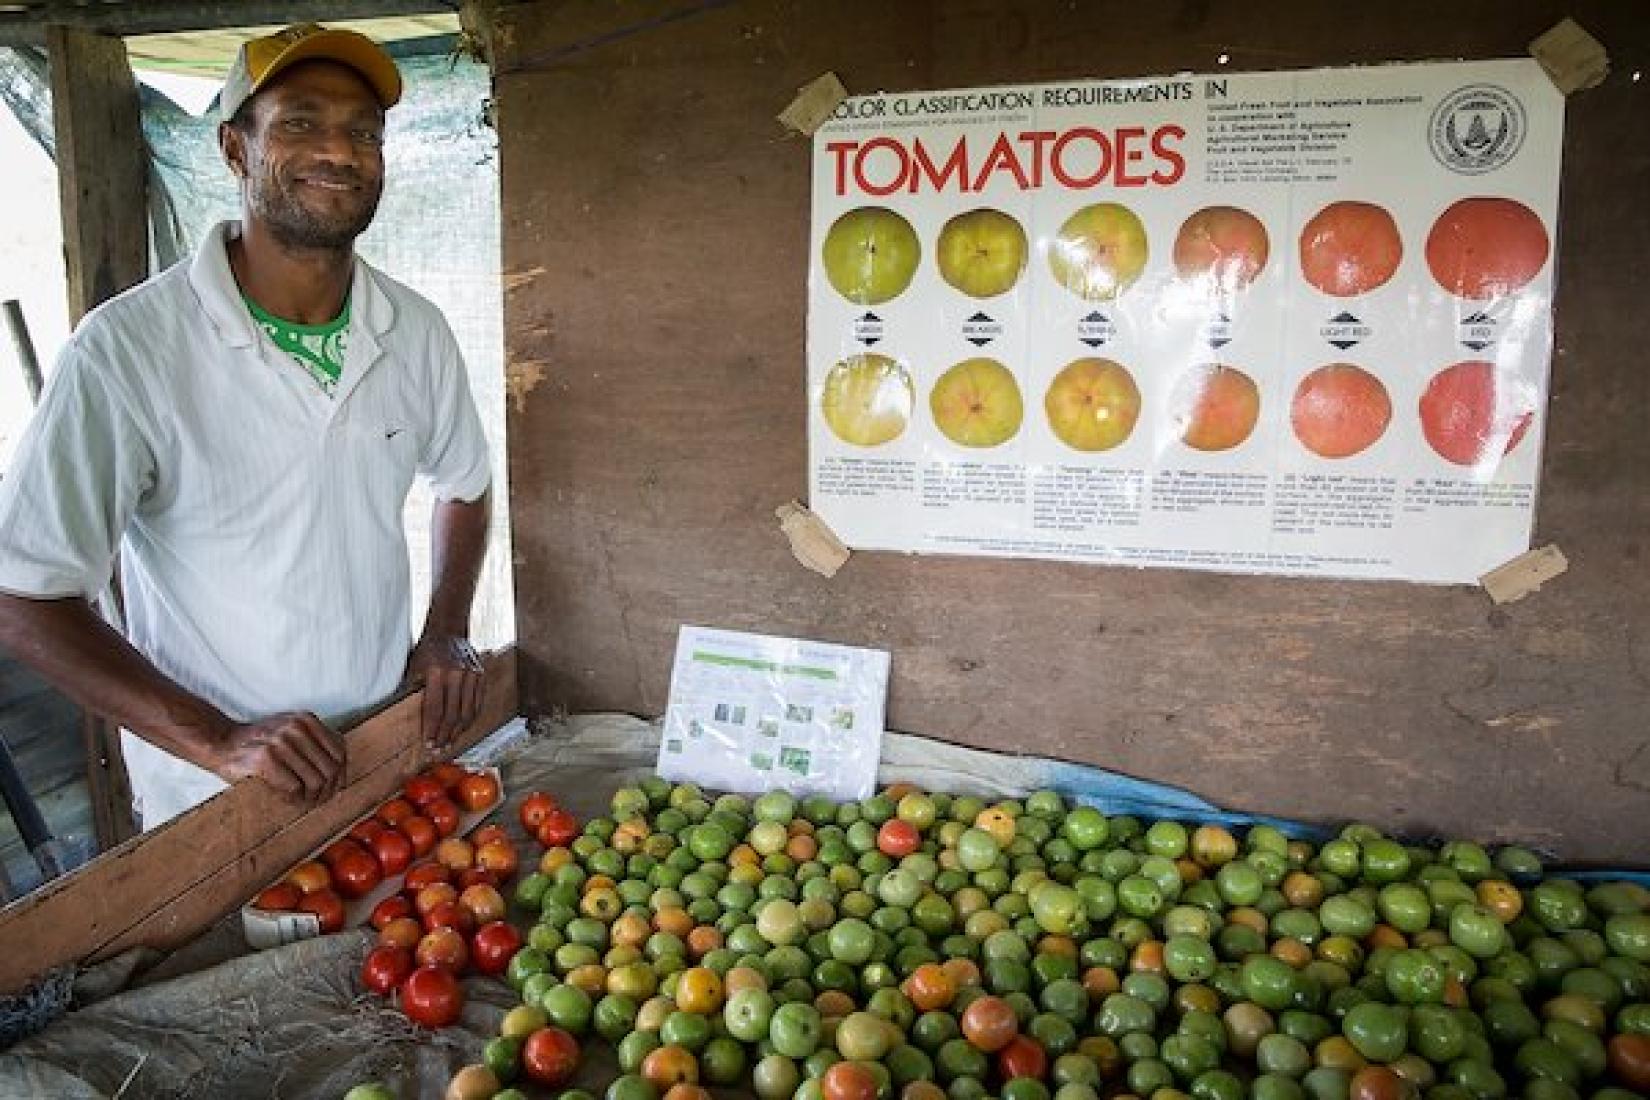 Jone Kunatui from Nawamangi PGS sorts through his tomatoes in his shed on his farm in Sigatoka Valley, commonly refered to as the salad bowl of Fiji. Image: ACIAR /Conor Ashleigh